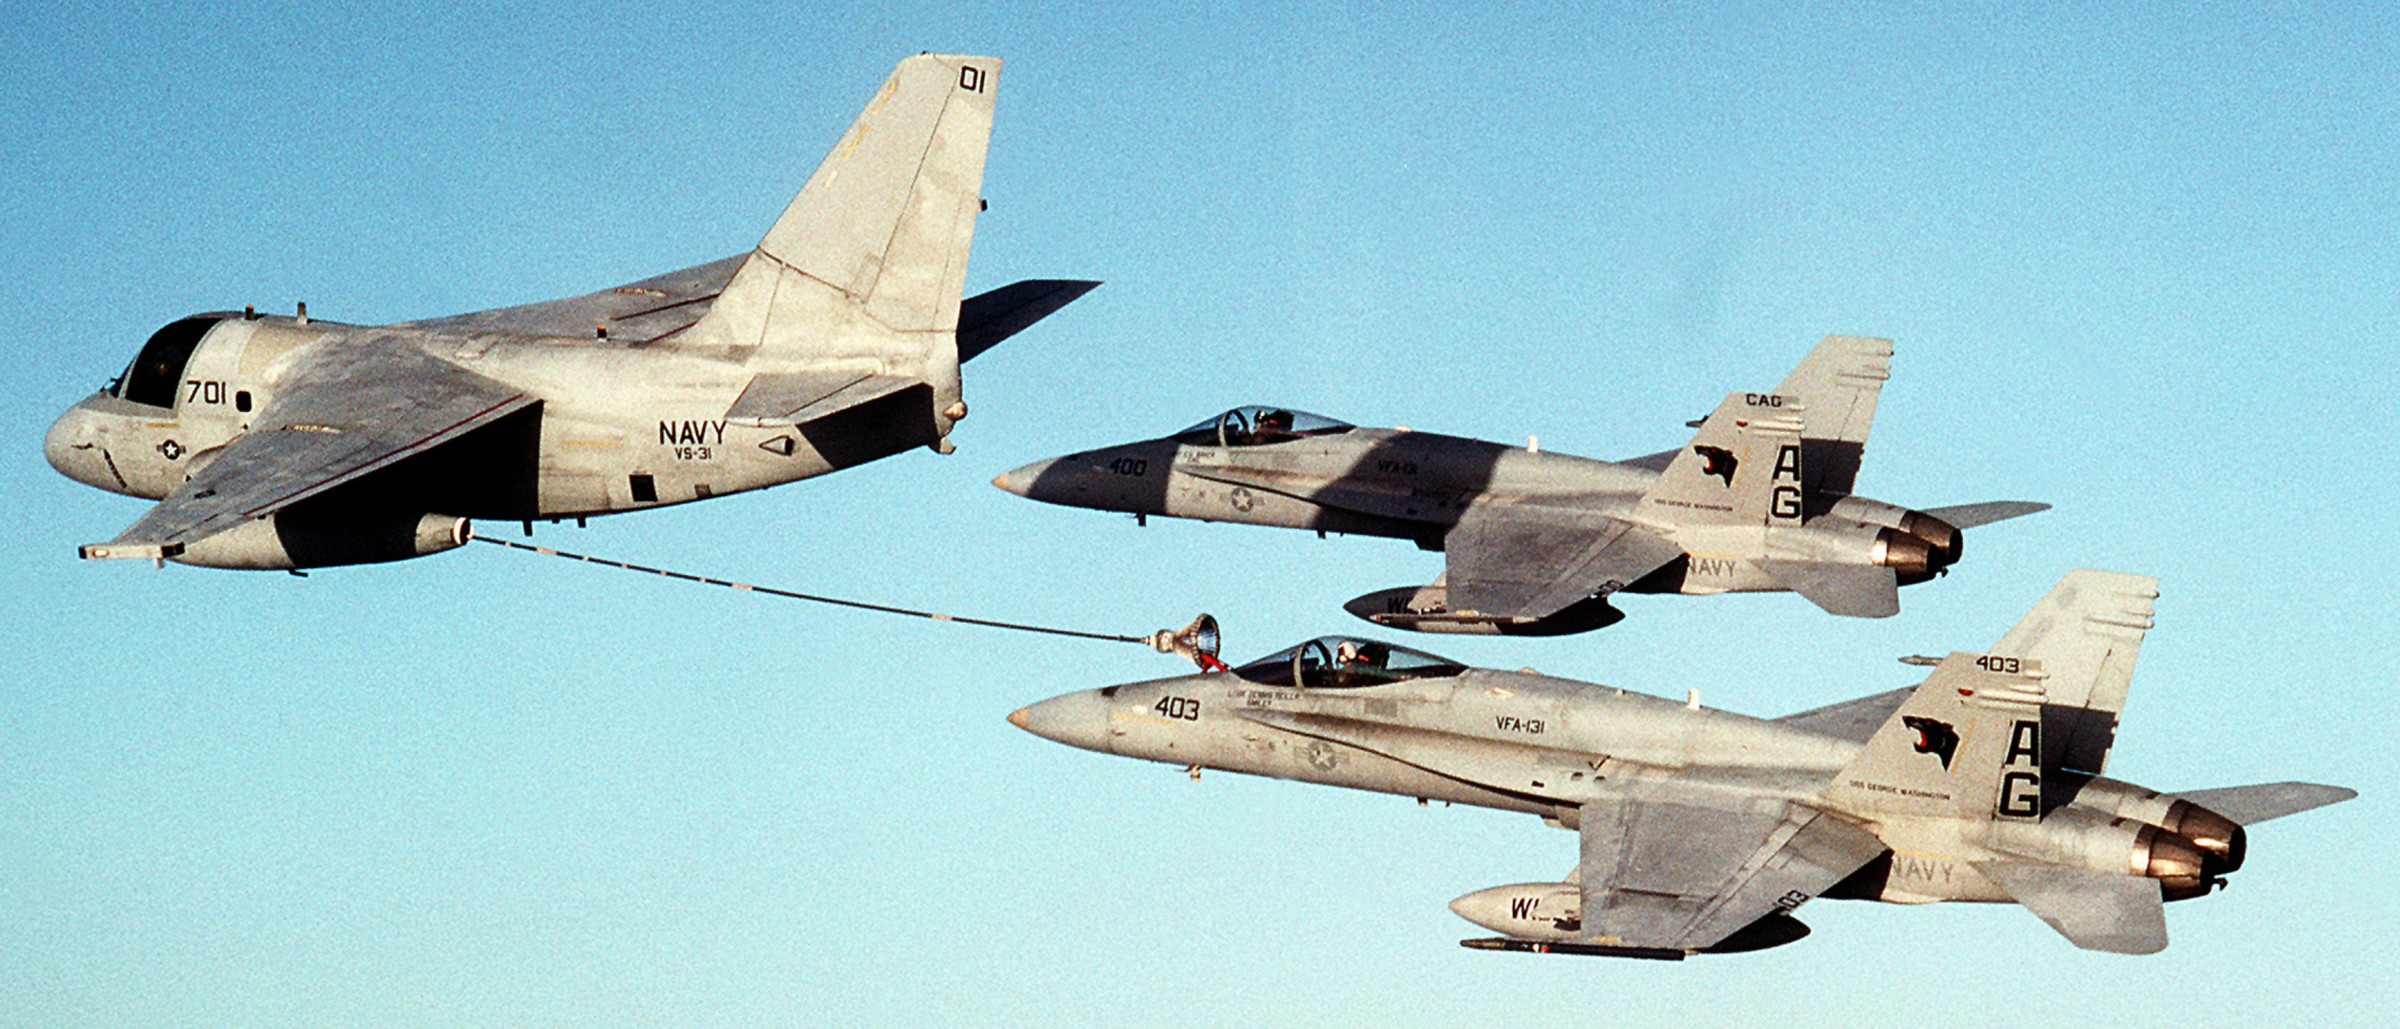 vfa-131 wildcats strike fighter squadron f/a-18c hornet cvw-7 refueling s-3 viking vs-31 1992 130